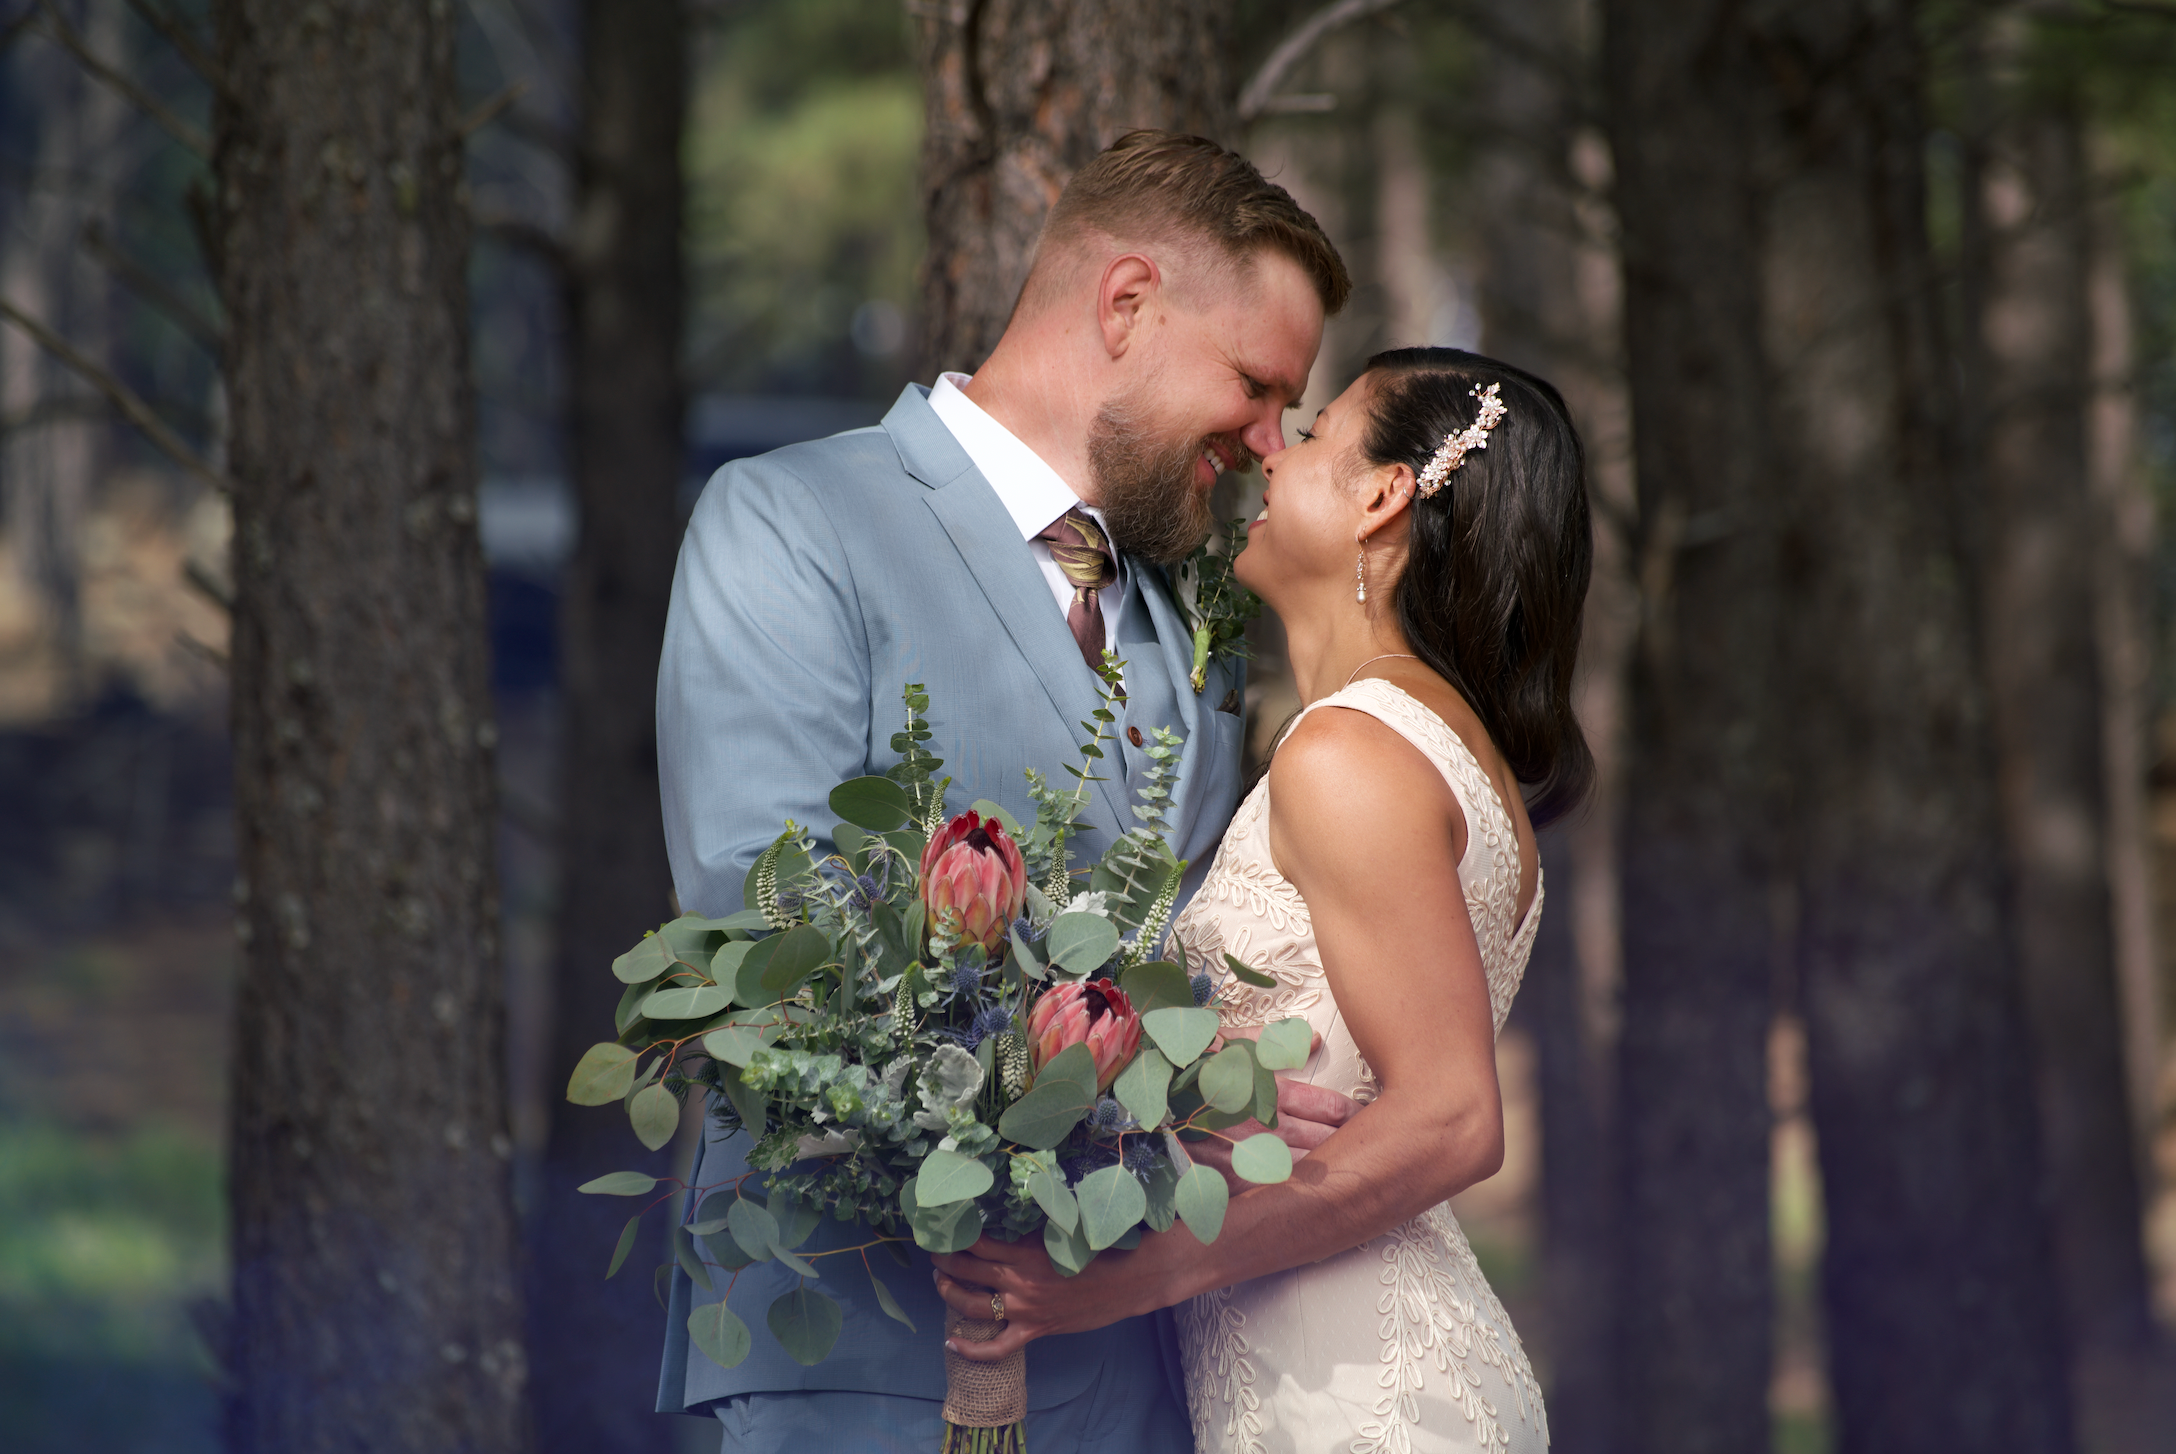 Smiling bride and groom holding a wedding bouquet containing eucalyptus and protea